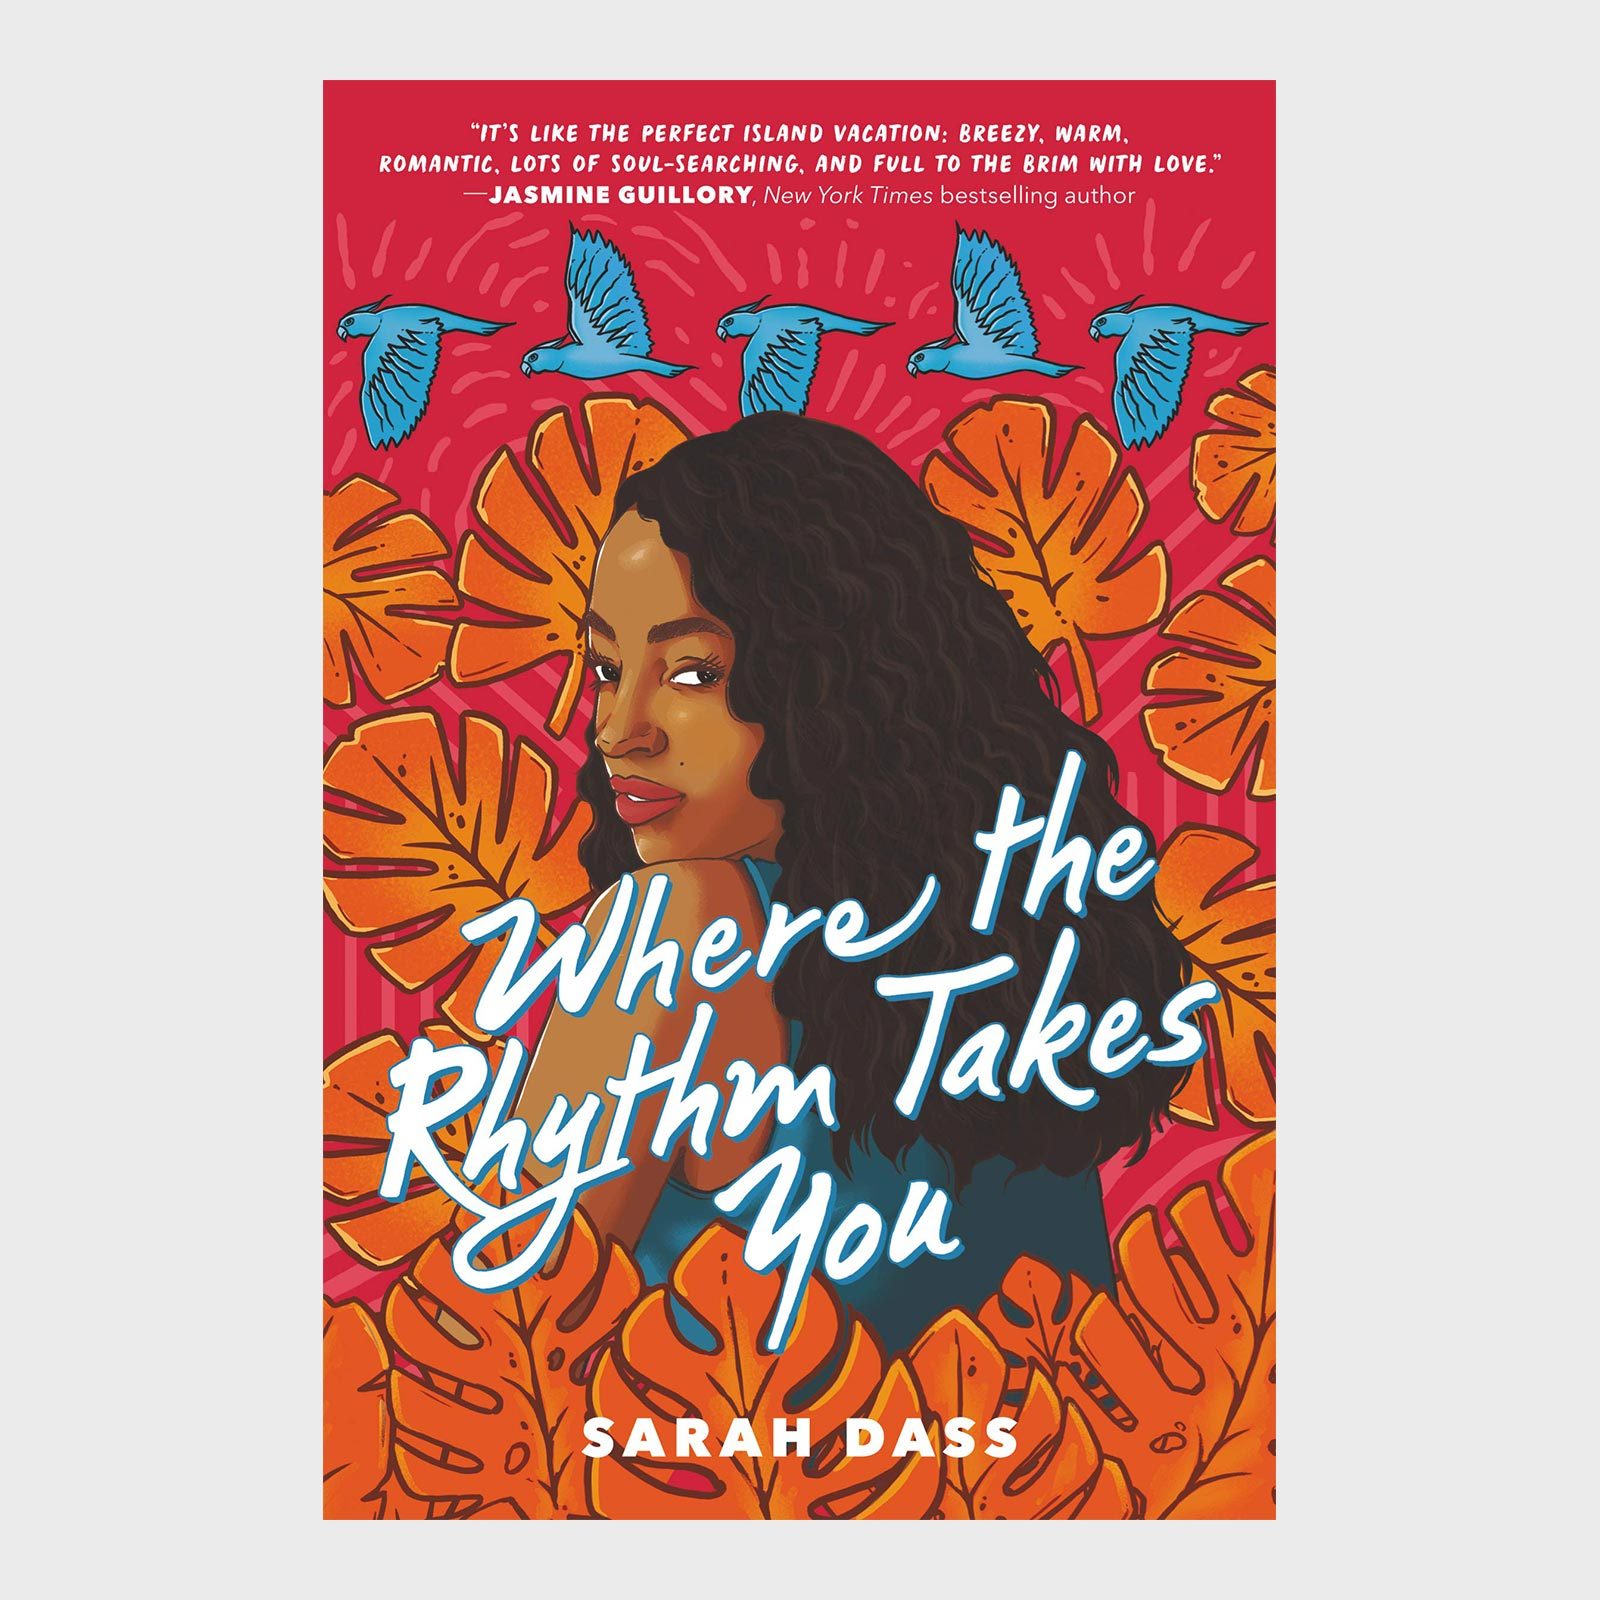 <h3><em>Where the Rhythm Takes You </em>by Sarah Dass</h3> <p><strong>Setting:</strong> Tobago</p> <p>Island life doesn't get much more romantic than this. Sarah Dass's 2021 novel is technically a <a href="https://www.rd.com/list/best-books-for-teens/" rel="noopener noreferrer">young adult book</a>, but <a href="https://www.amazon.com/Where-Rhythm-Takes-Sarah-Dass/dp/0063018527" rel="noopener noreferrer"><em>Where the Rhythm Takes You</em></a> offers tropical escapism for readers of all ages. Reyna's family owns Plumeria, a beachside resort in Tobago. It's a perfect paradise for guests, but ever since her best friend and first love left the island, Reyna dreams of escaping into the real world too. Only now that she's poised for departure, her flame is back—this time as a Grammy-nominated superstar. What will he think of his sheltered island friend now? Will his presence be enough to make her stay a little longer? Crack this spine on a hot summer day to fully soak up the distinct island vibes.</p> <p class="listicle-page__cta-button-shop"><a class="shop-btn" href="https://www.amazon.com/Where-Rhythm-Takes-Sarah-Dass/dp/0063018527">Shop Now</a></p>